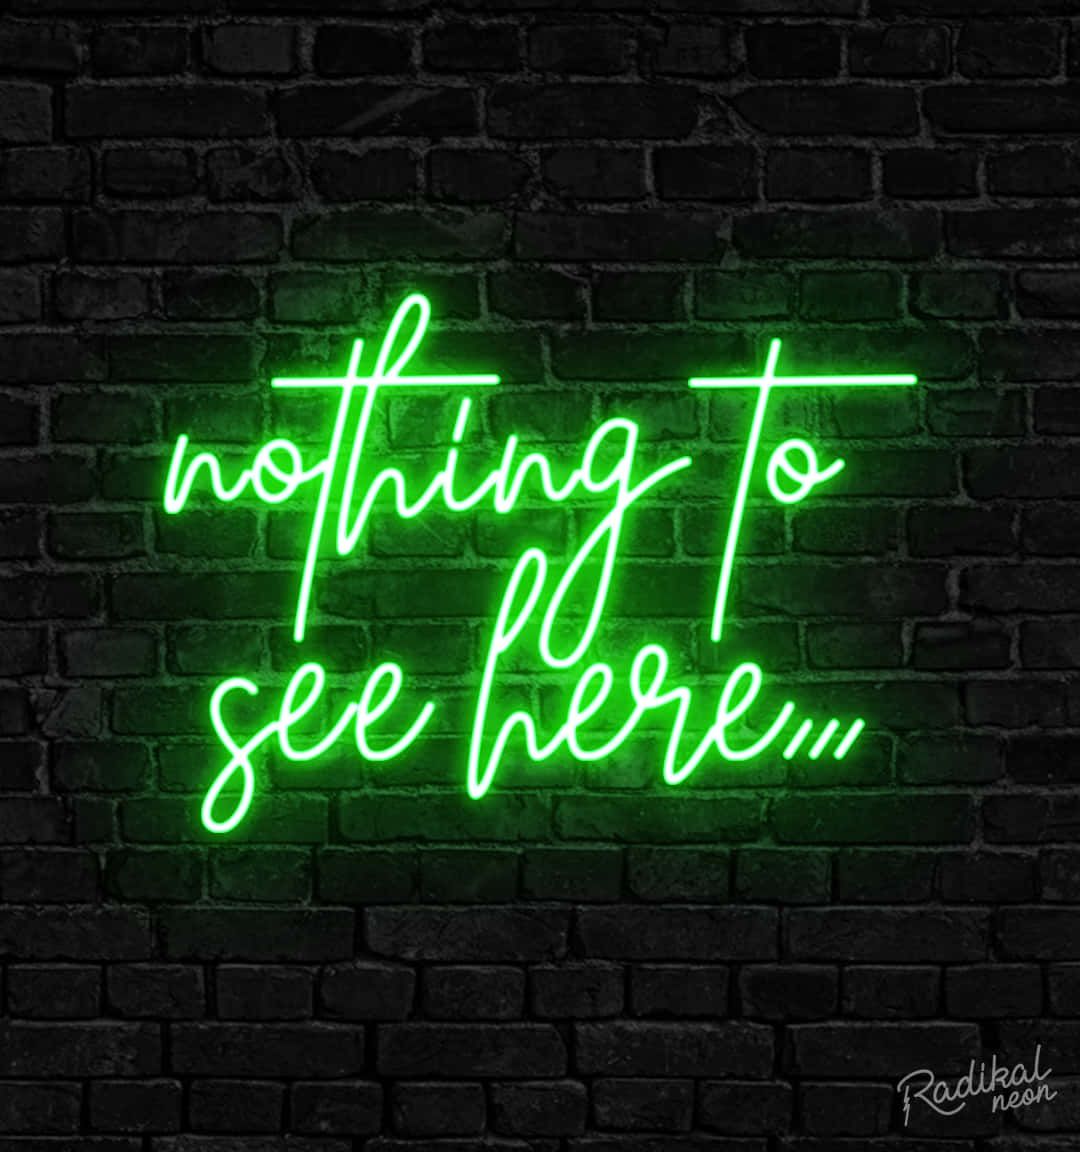 A green neon sign that reads 